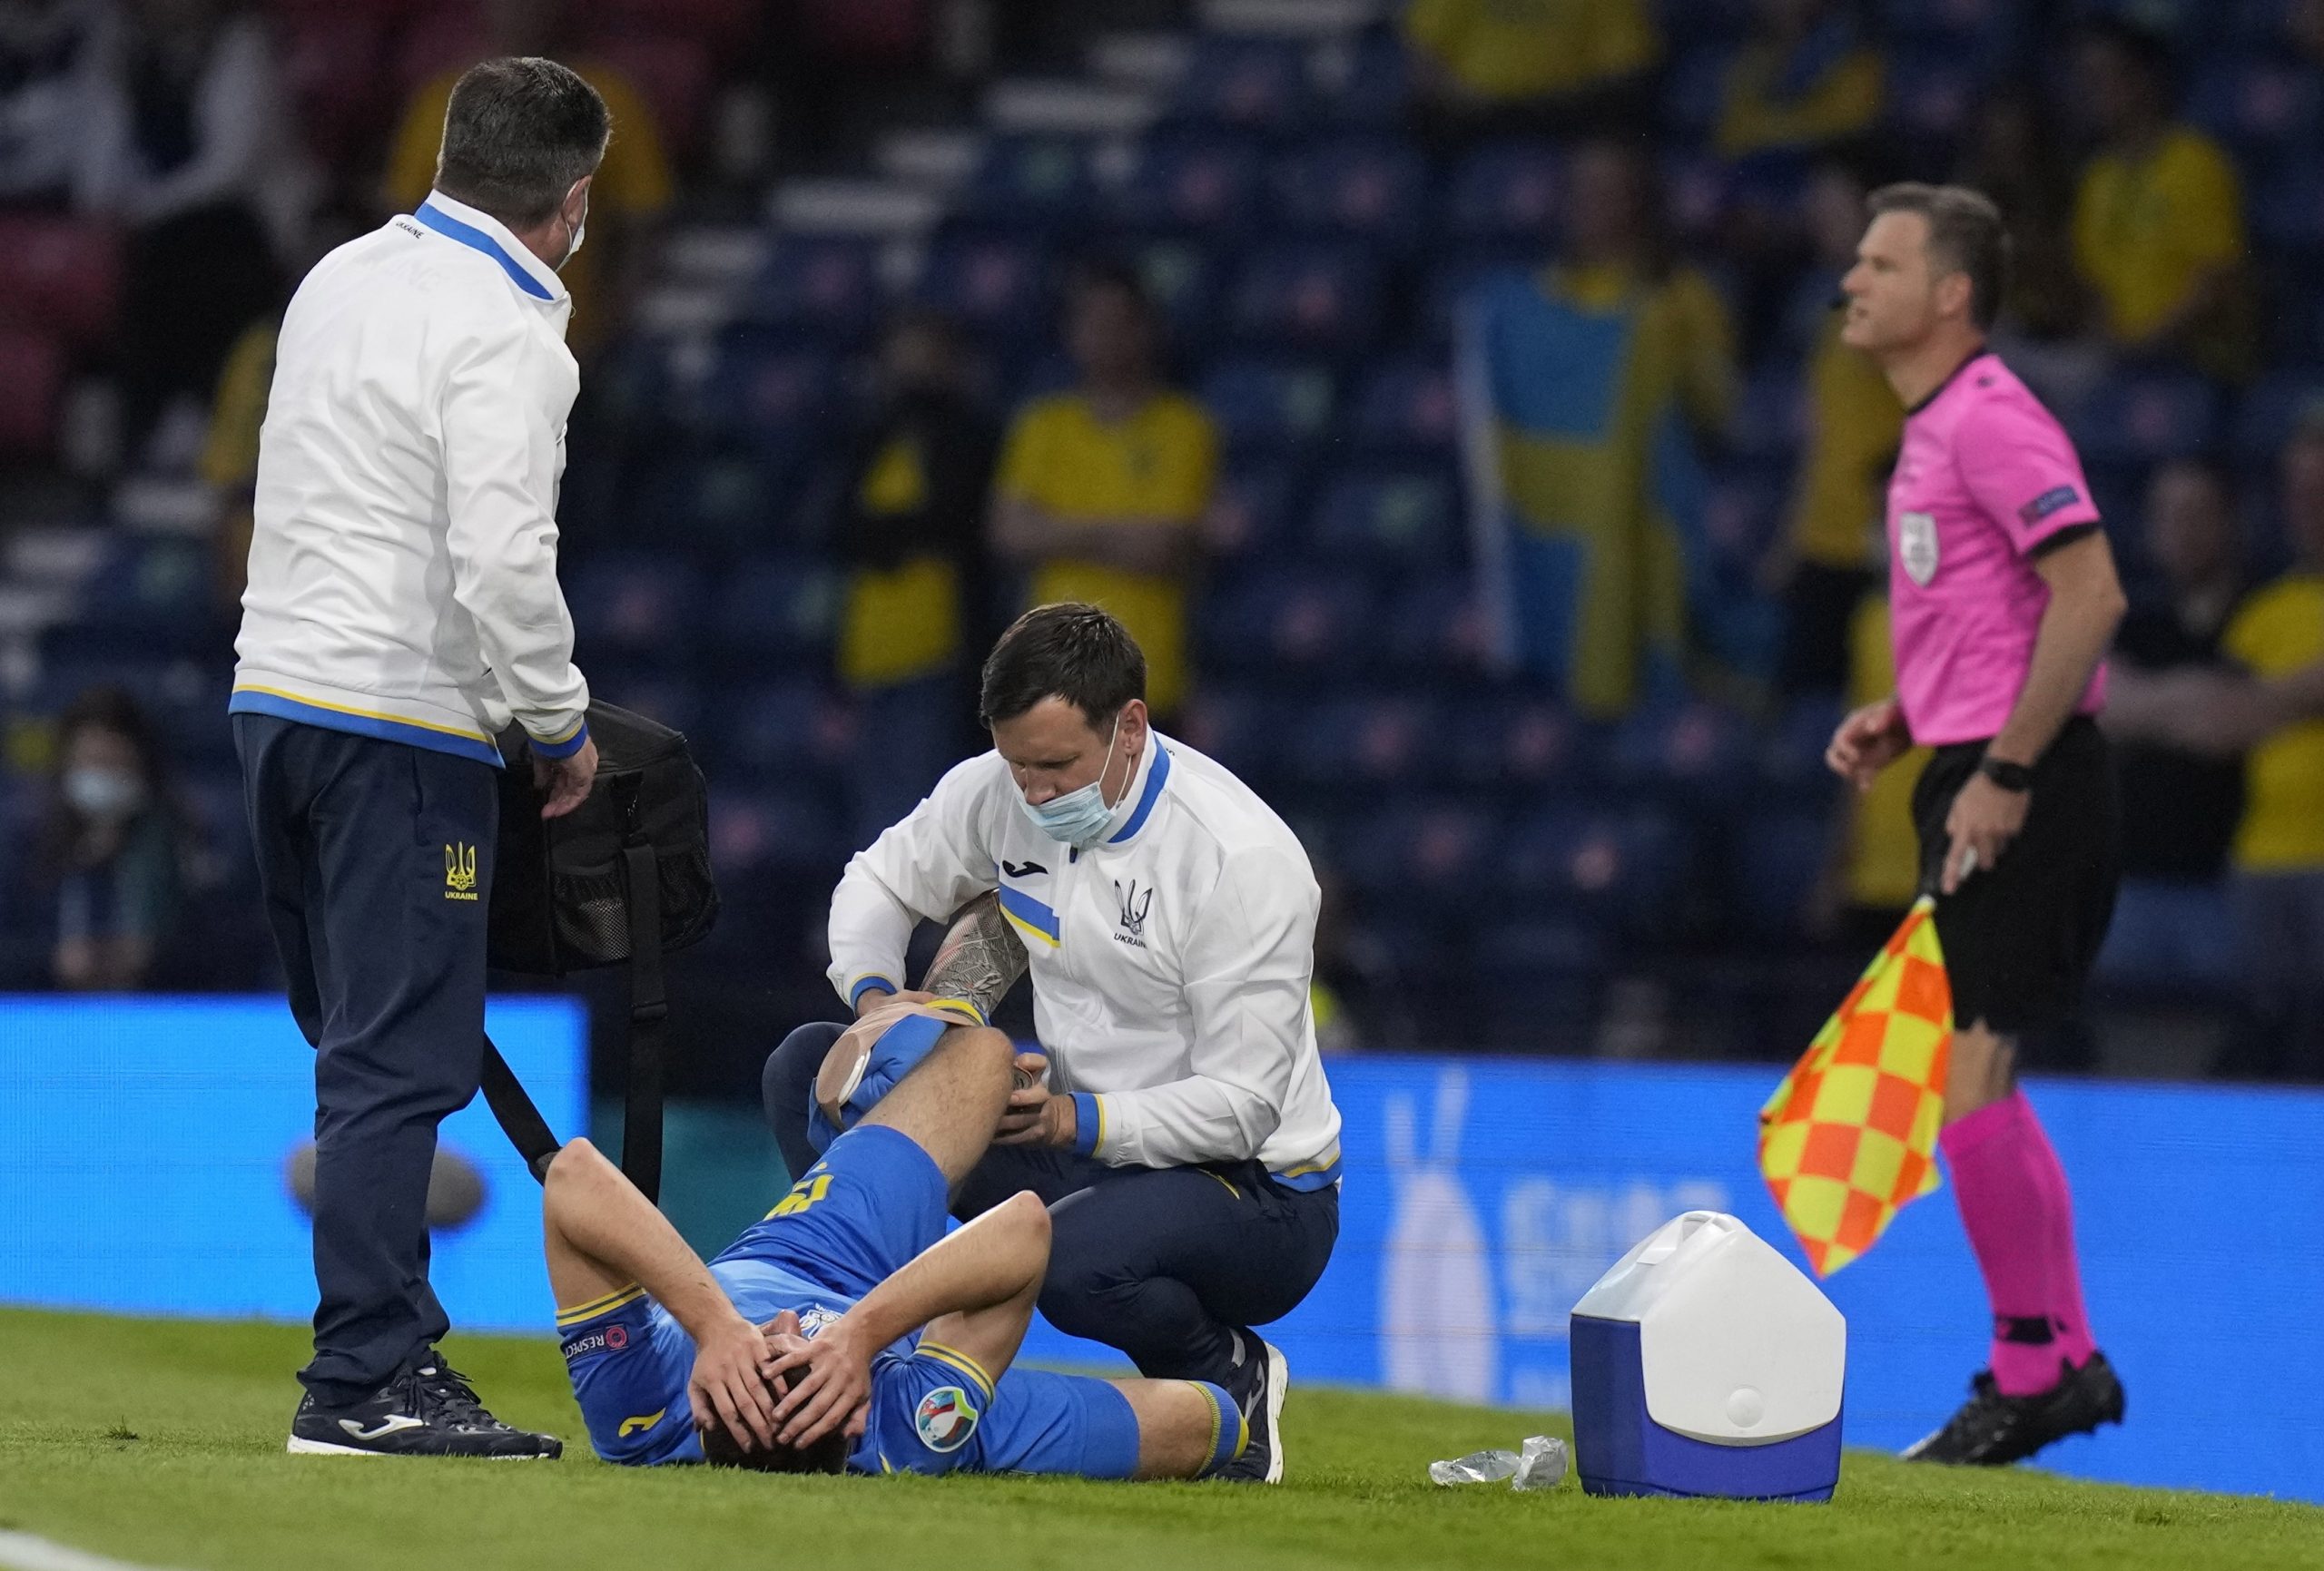 epa09312271 Artem Besyedin (bottom) of Ukraine receives medical assistance during the UEFA EURO 2020 round of 16 soccer match between Sweden and Ukraine in Glasgow, Britain, 29 June 2021.  EPA/Petr Josek / POOL (RESTRICTIONS: For editorial news reporting purposes only. Images must appear as still images and must not emulate match action video footage. Photographs published in online publications shall have an interval of at least 20 seconds between the posting.)